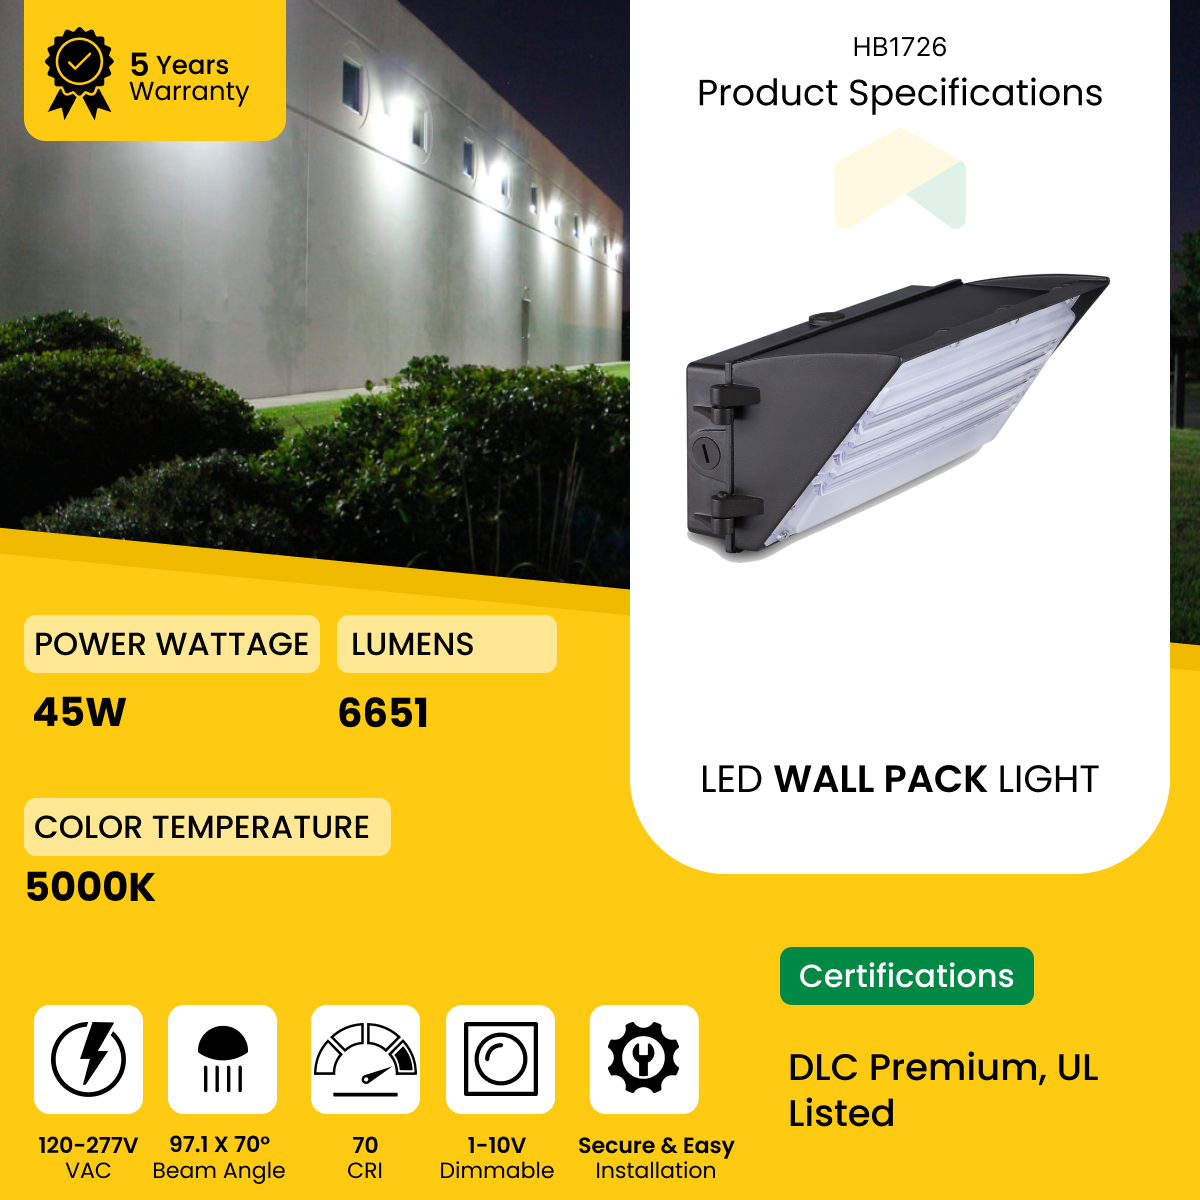 LED Semi Cutoff Wall Pack Light 45W  - 5000K - 6651 Lumens  - AC120-277V  0-10V Dimmable - IP66 - UL Listed - DLC Premium Listed - 5 Years Warranty